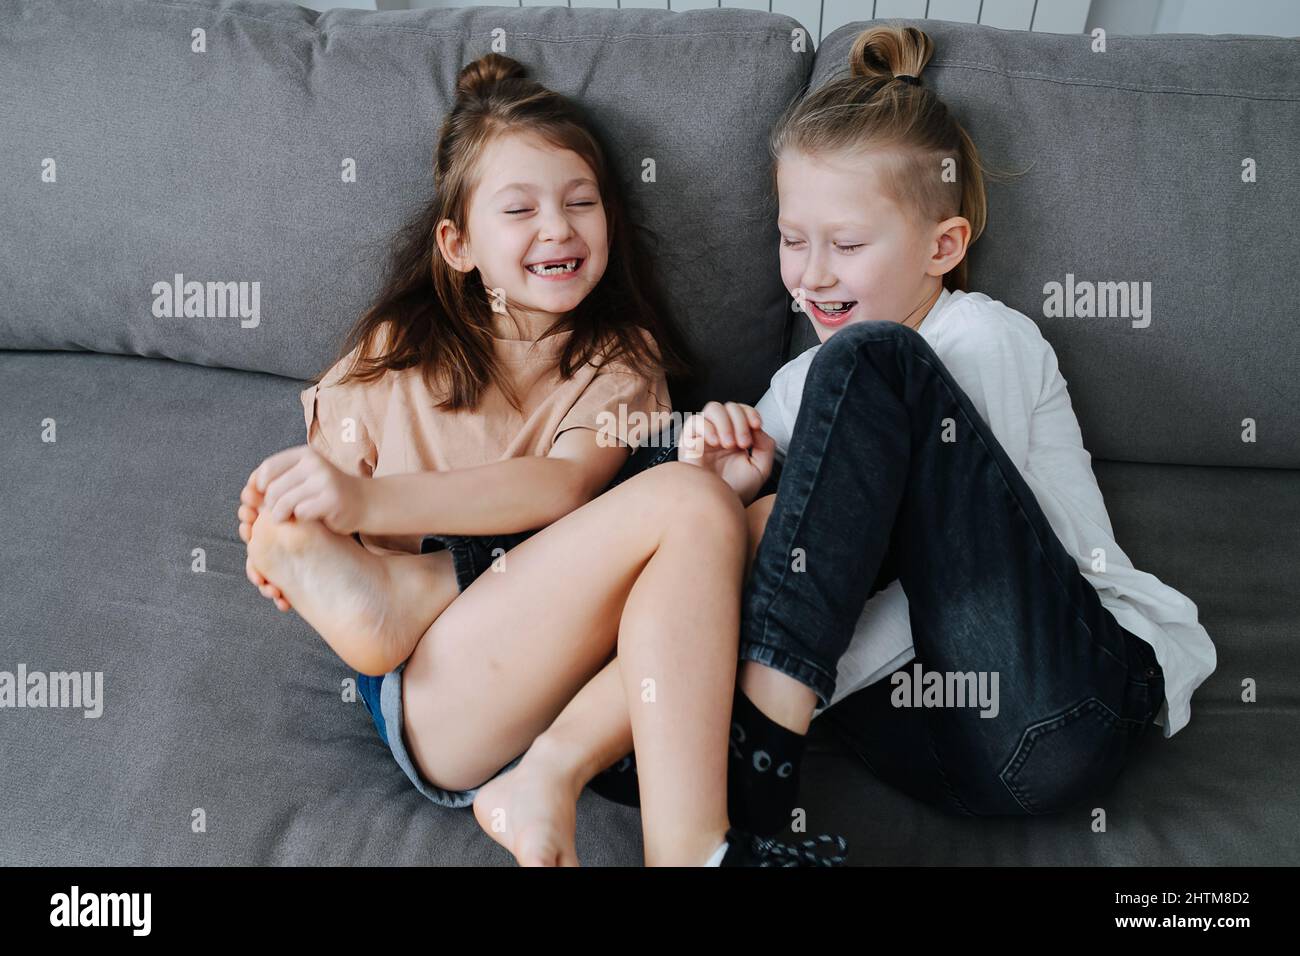 Two kids having a good time, trying to tickle each other's feet. They sit on a couch, eyes closed, having a laugh. Stock Photo